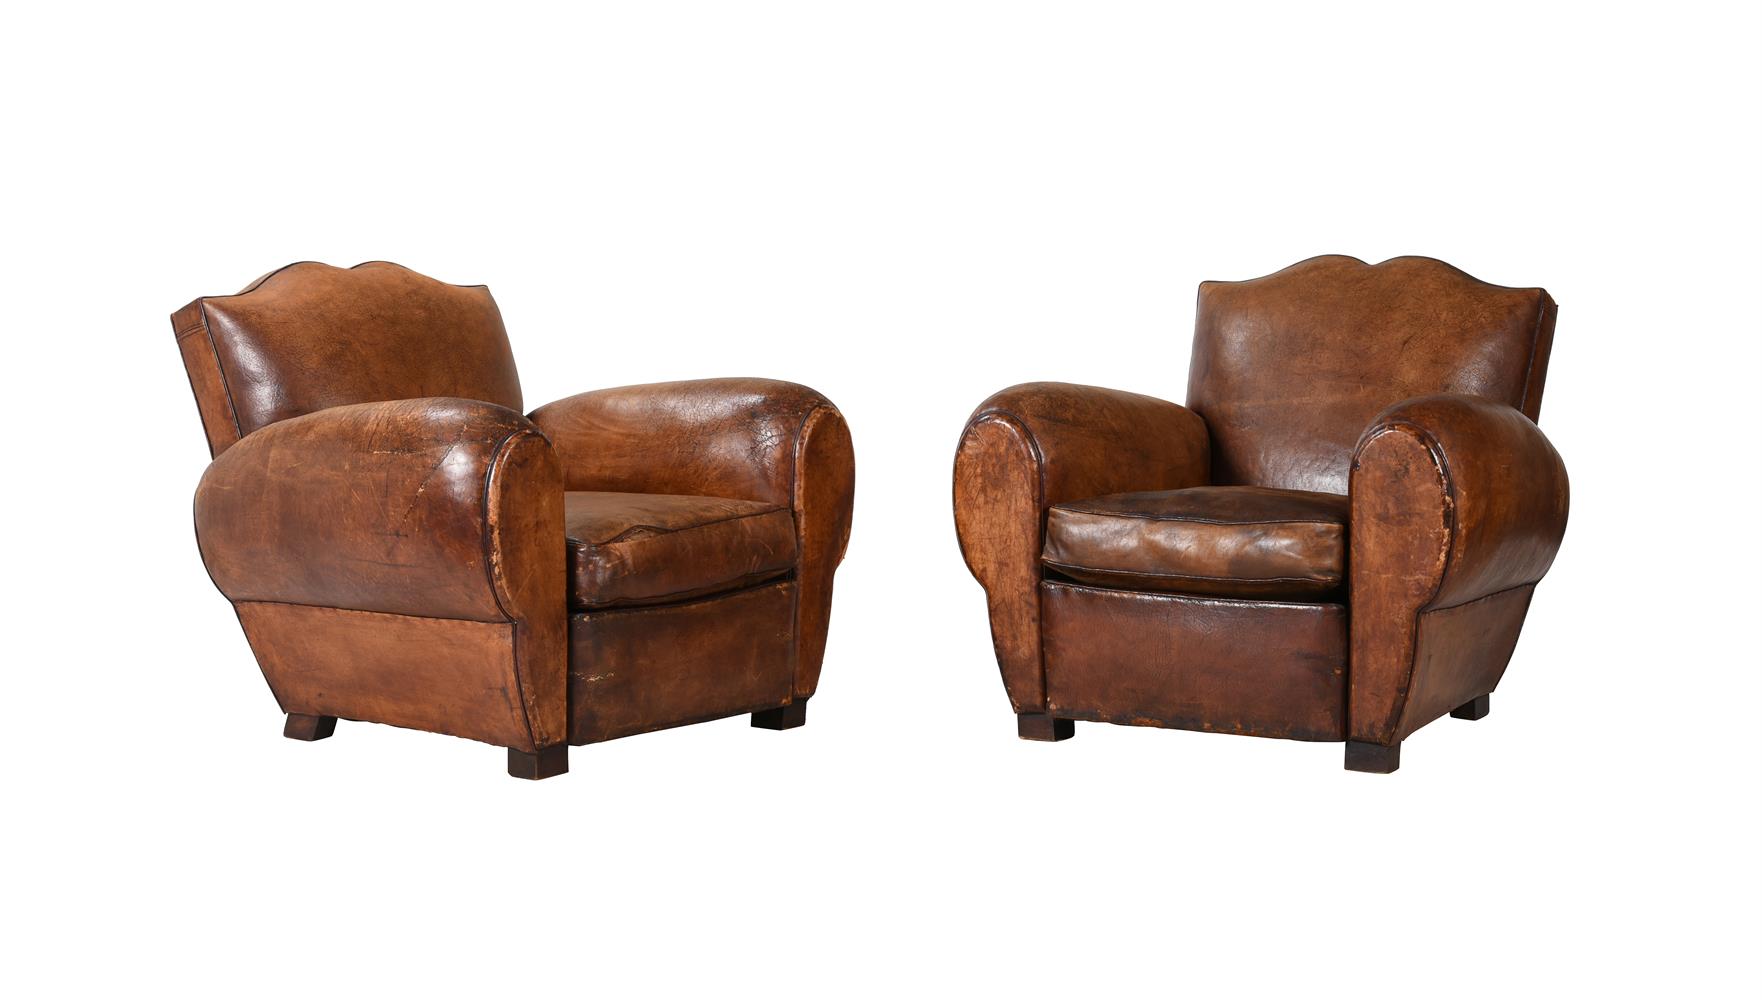 A PAIR OF ART DECO LEATHER ARMCHAIRS